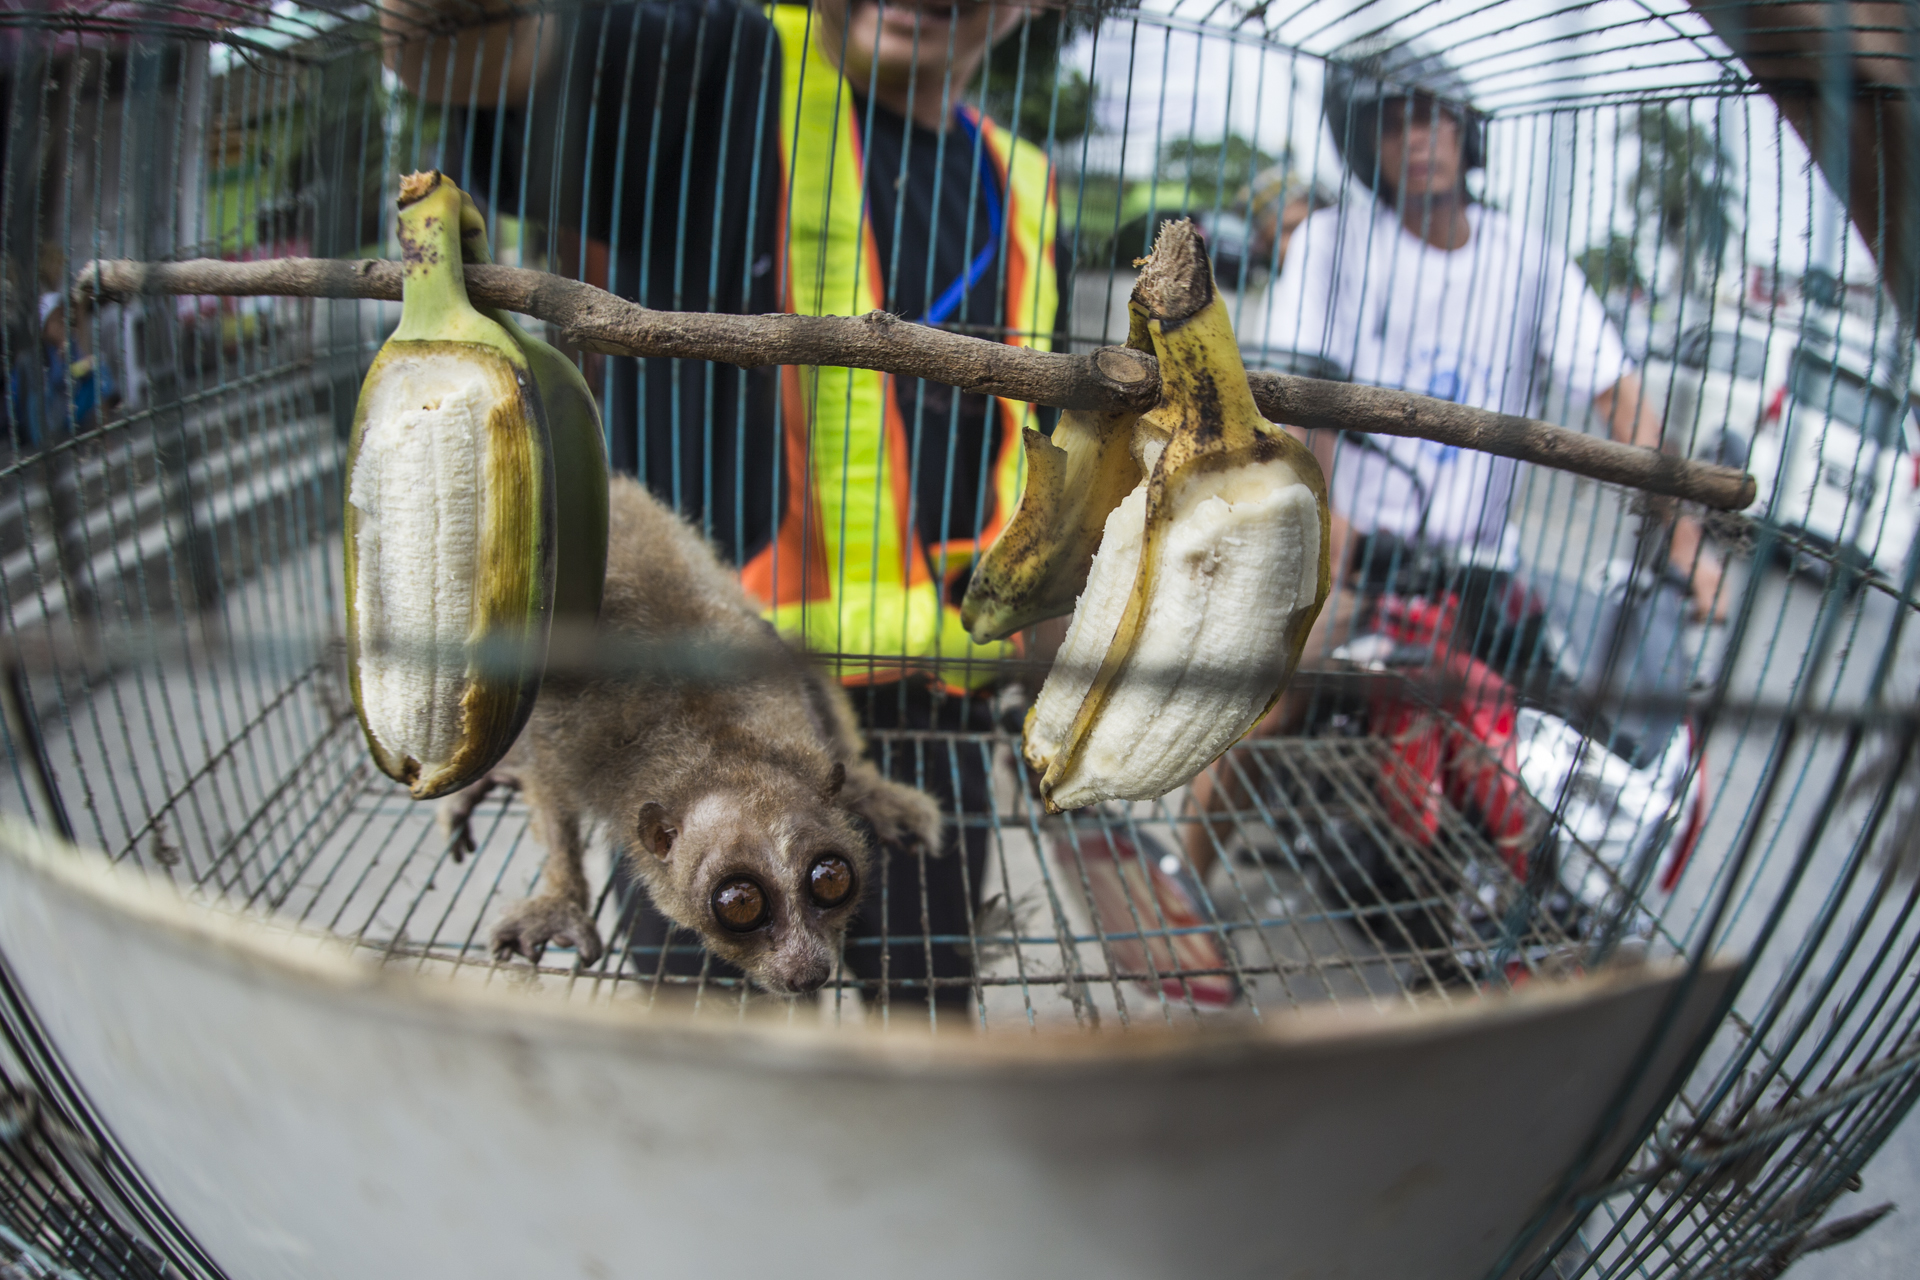  A slow loris, a rare nocturnal creature bought for $5 and shown off in the hot Indonesian sun by it's purchaser, a traffic warden.&nbsp; 